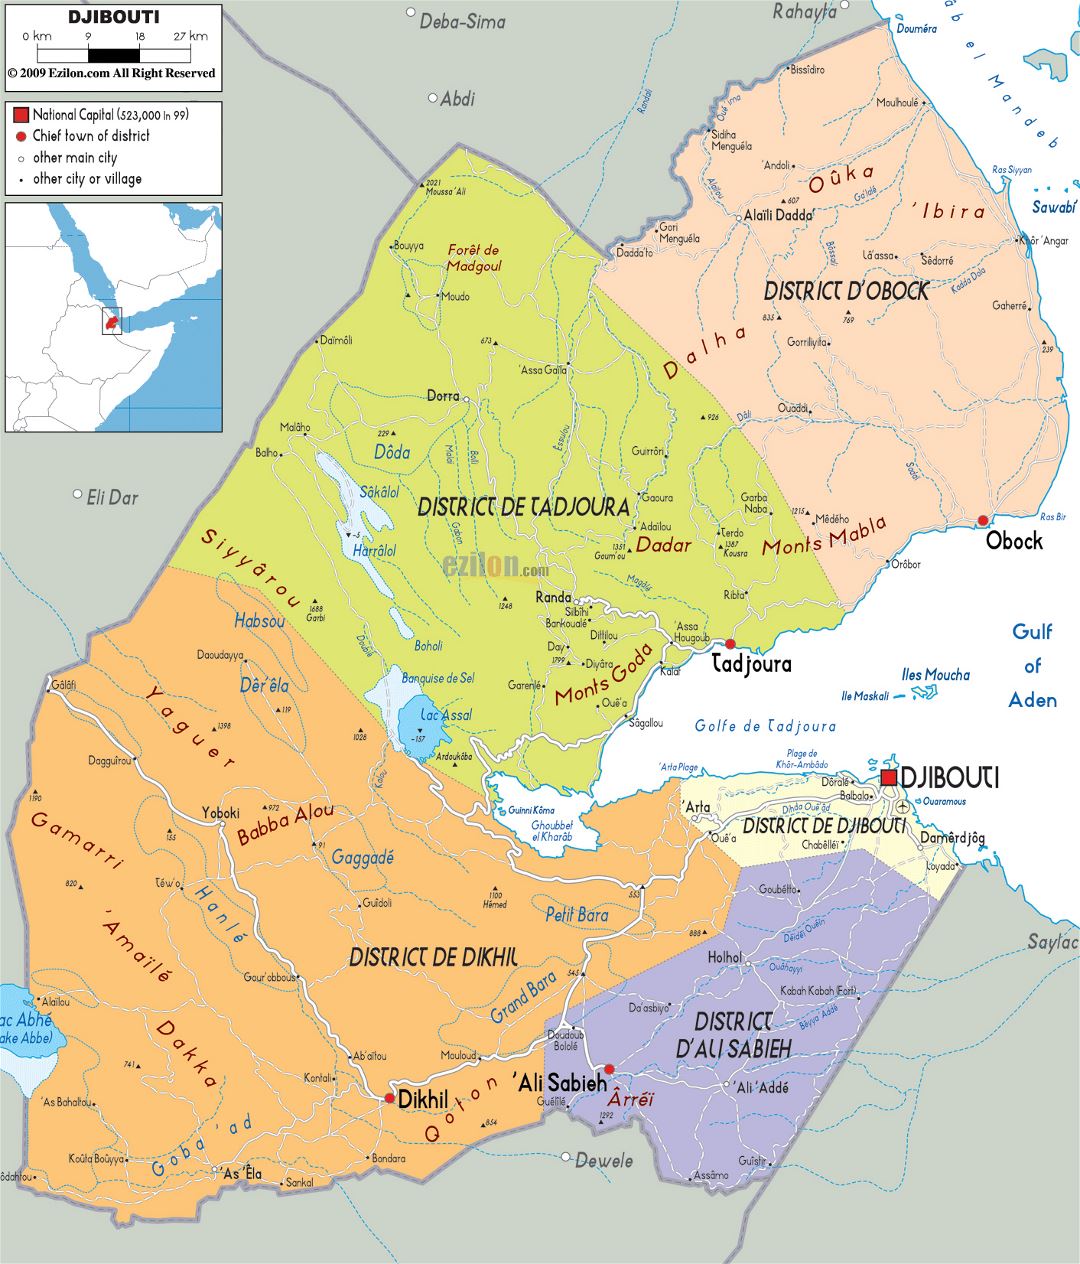 Large political and administrative map of Djibouti with roads, cities and airports